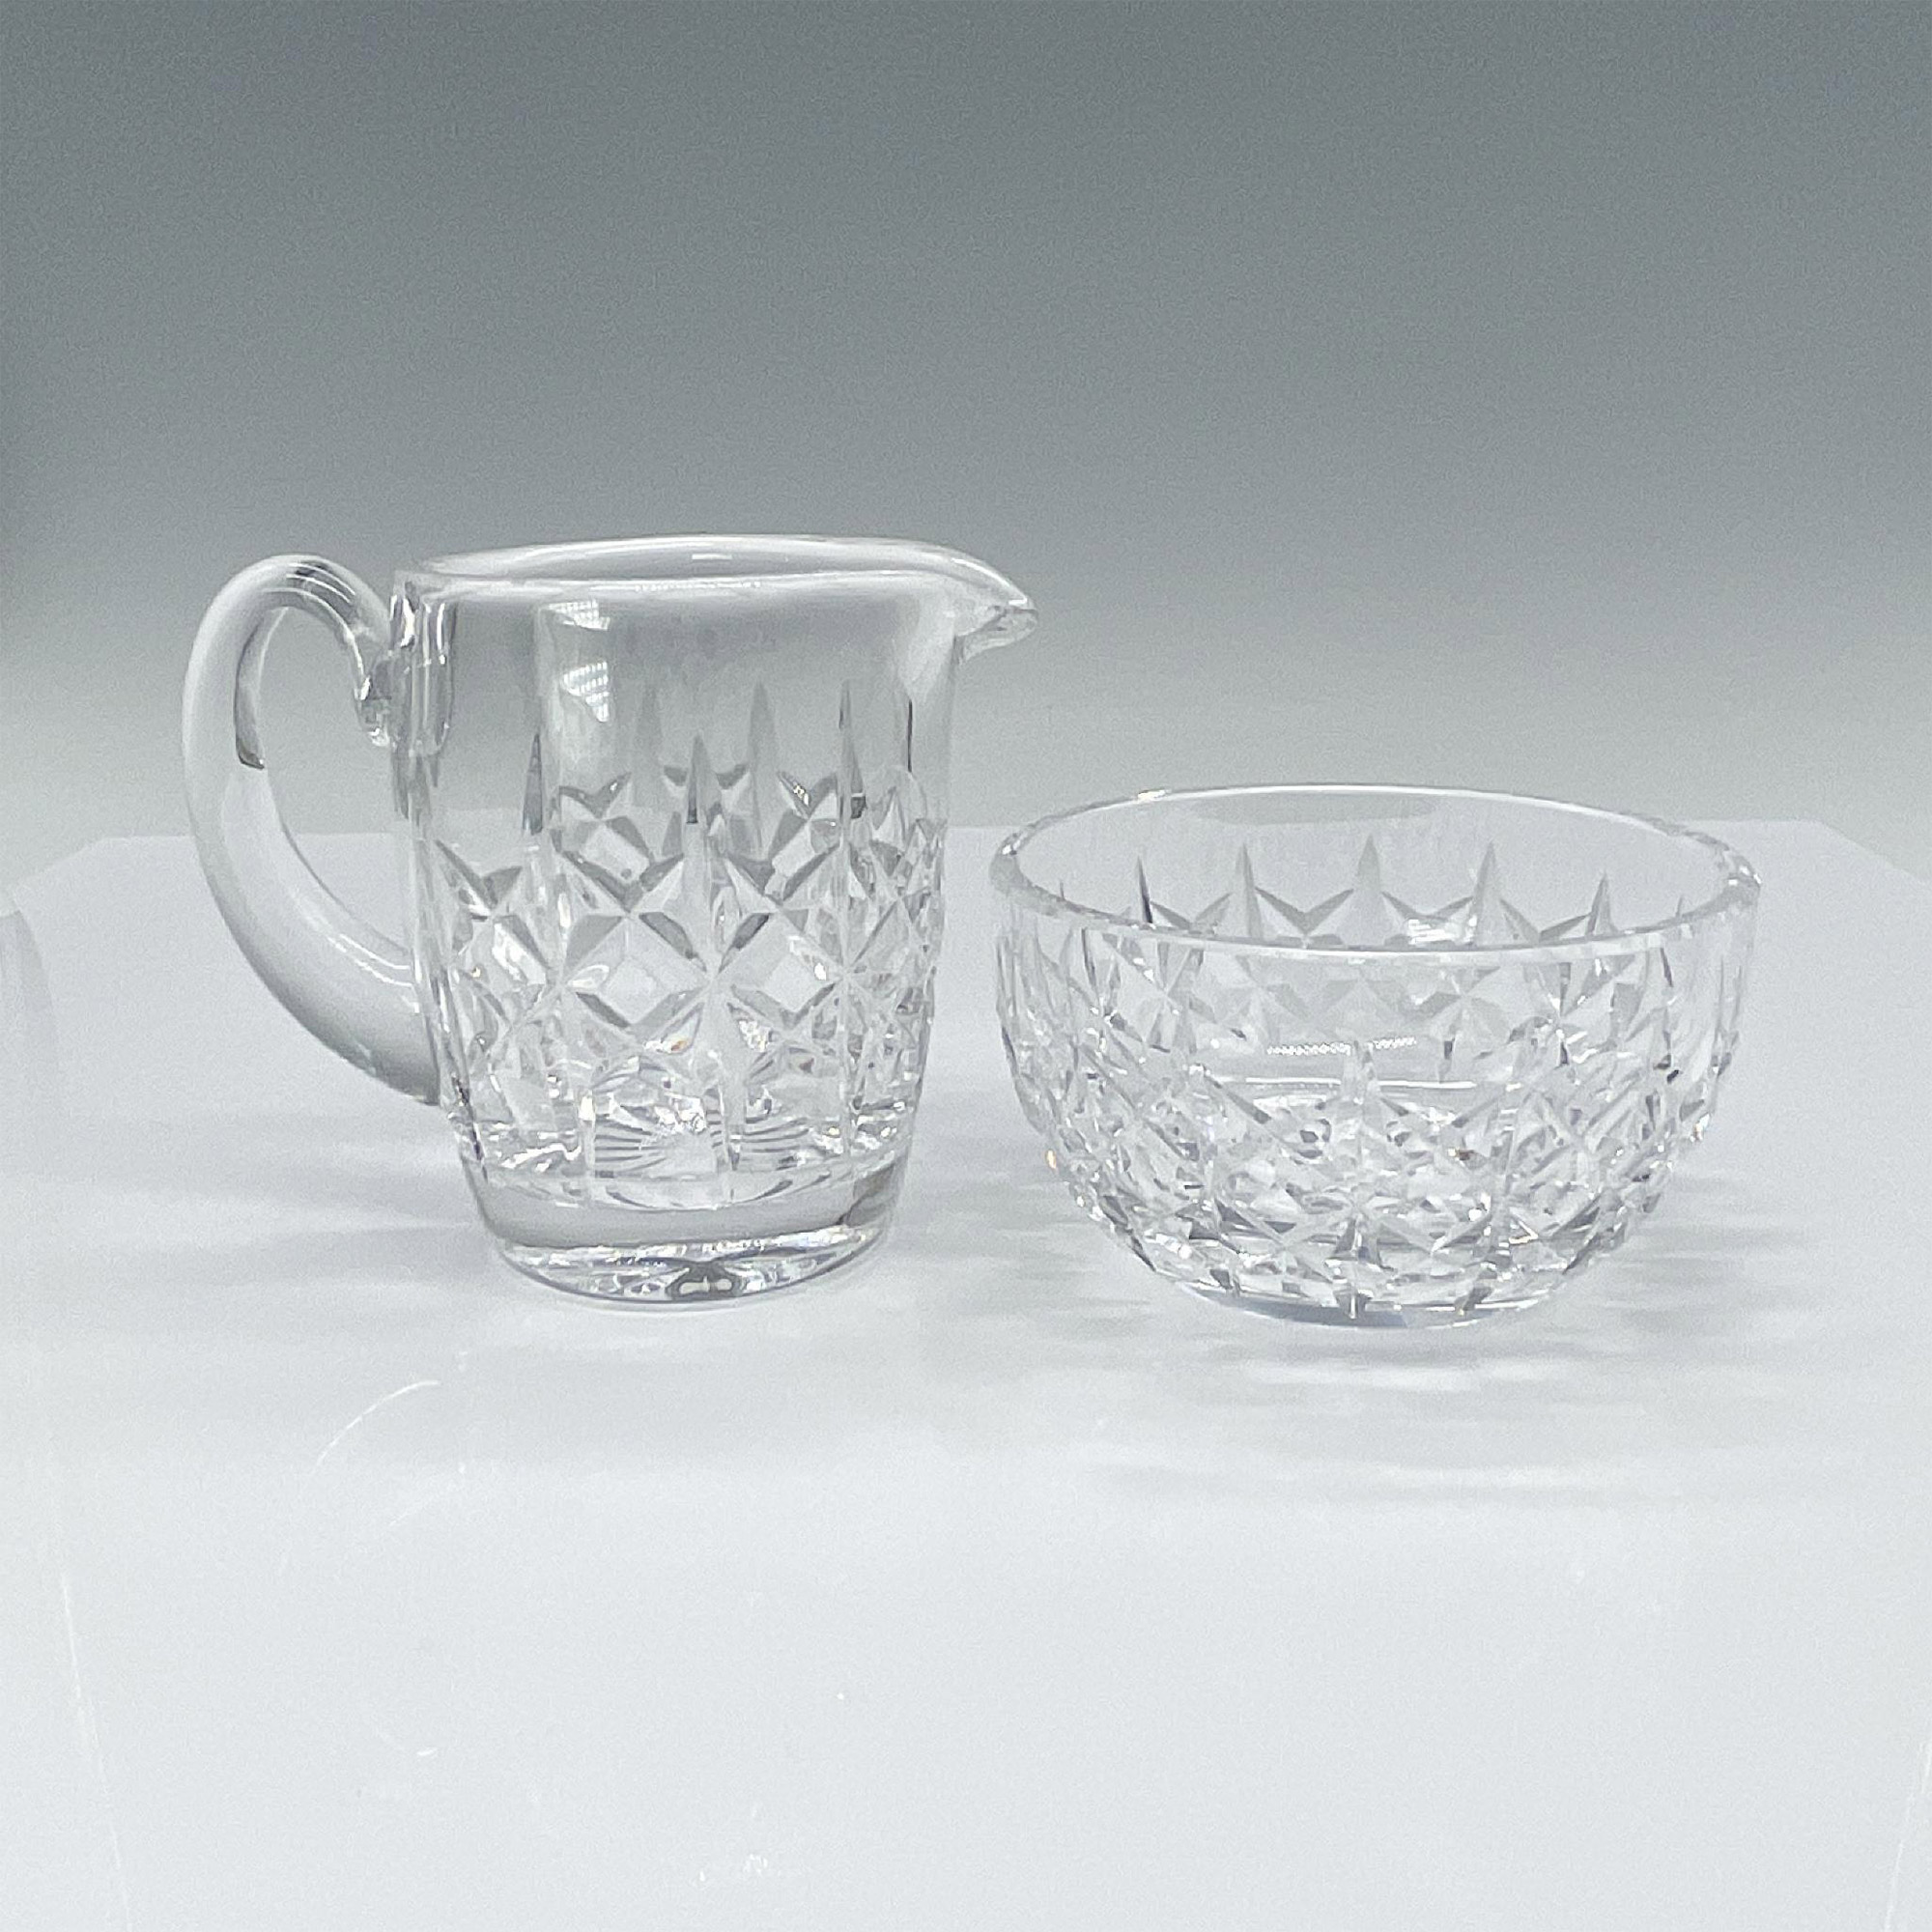 2pc Waterford Crystal Bowl & Small Pitcher - Image 2 of 3